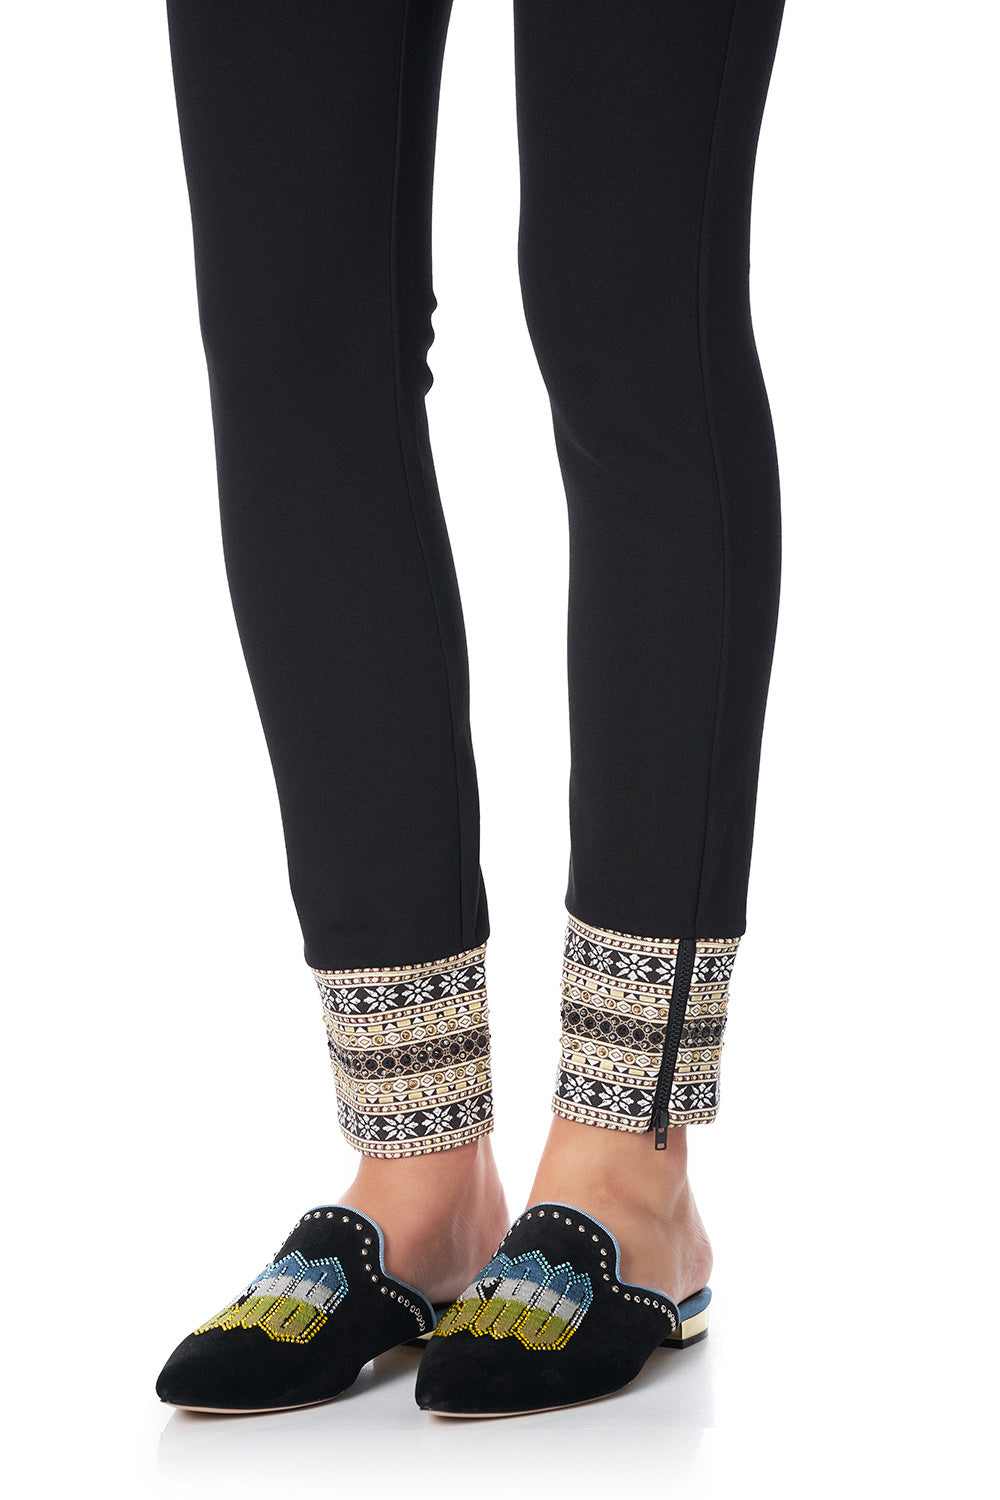 LEGGINGS WITH CONTRAST CUFF BOTANICAL CHRONICLES